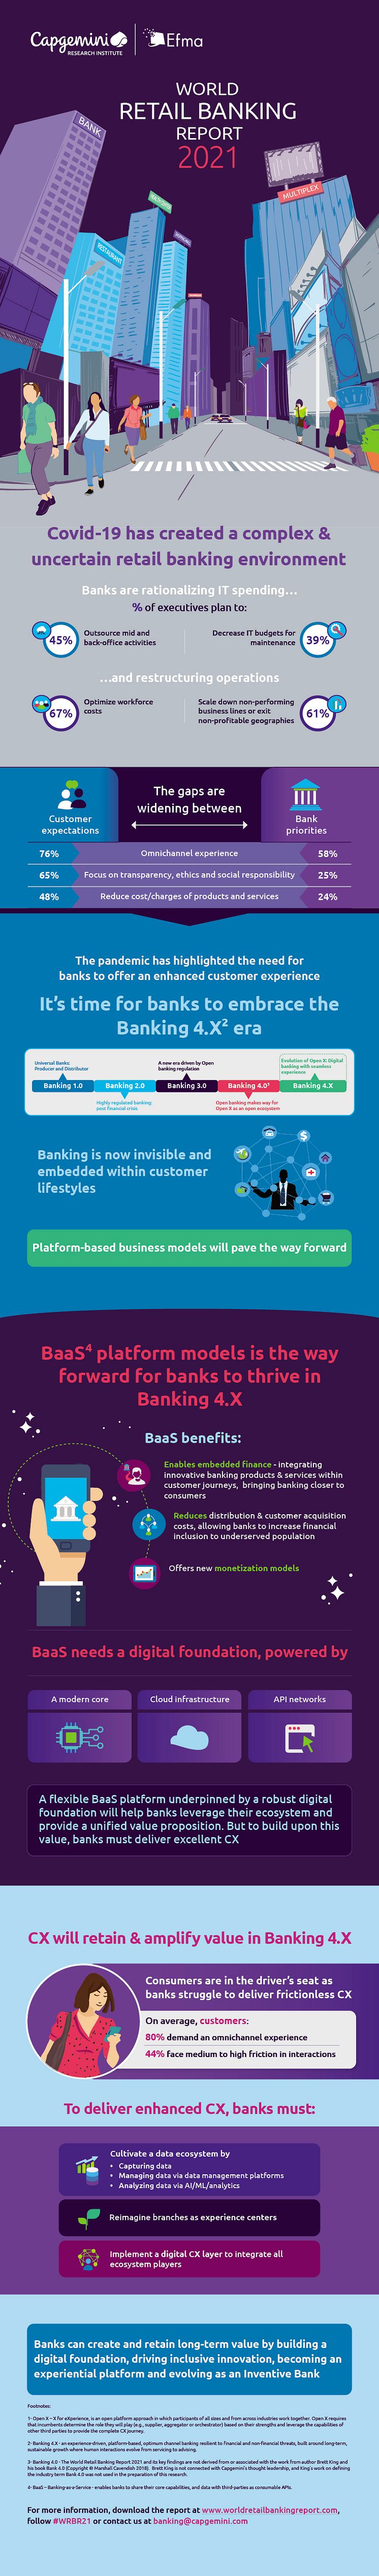 World Retail Banking Report - Infographic